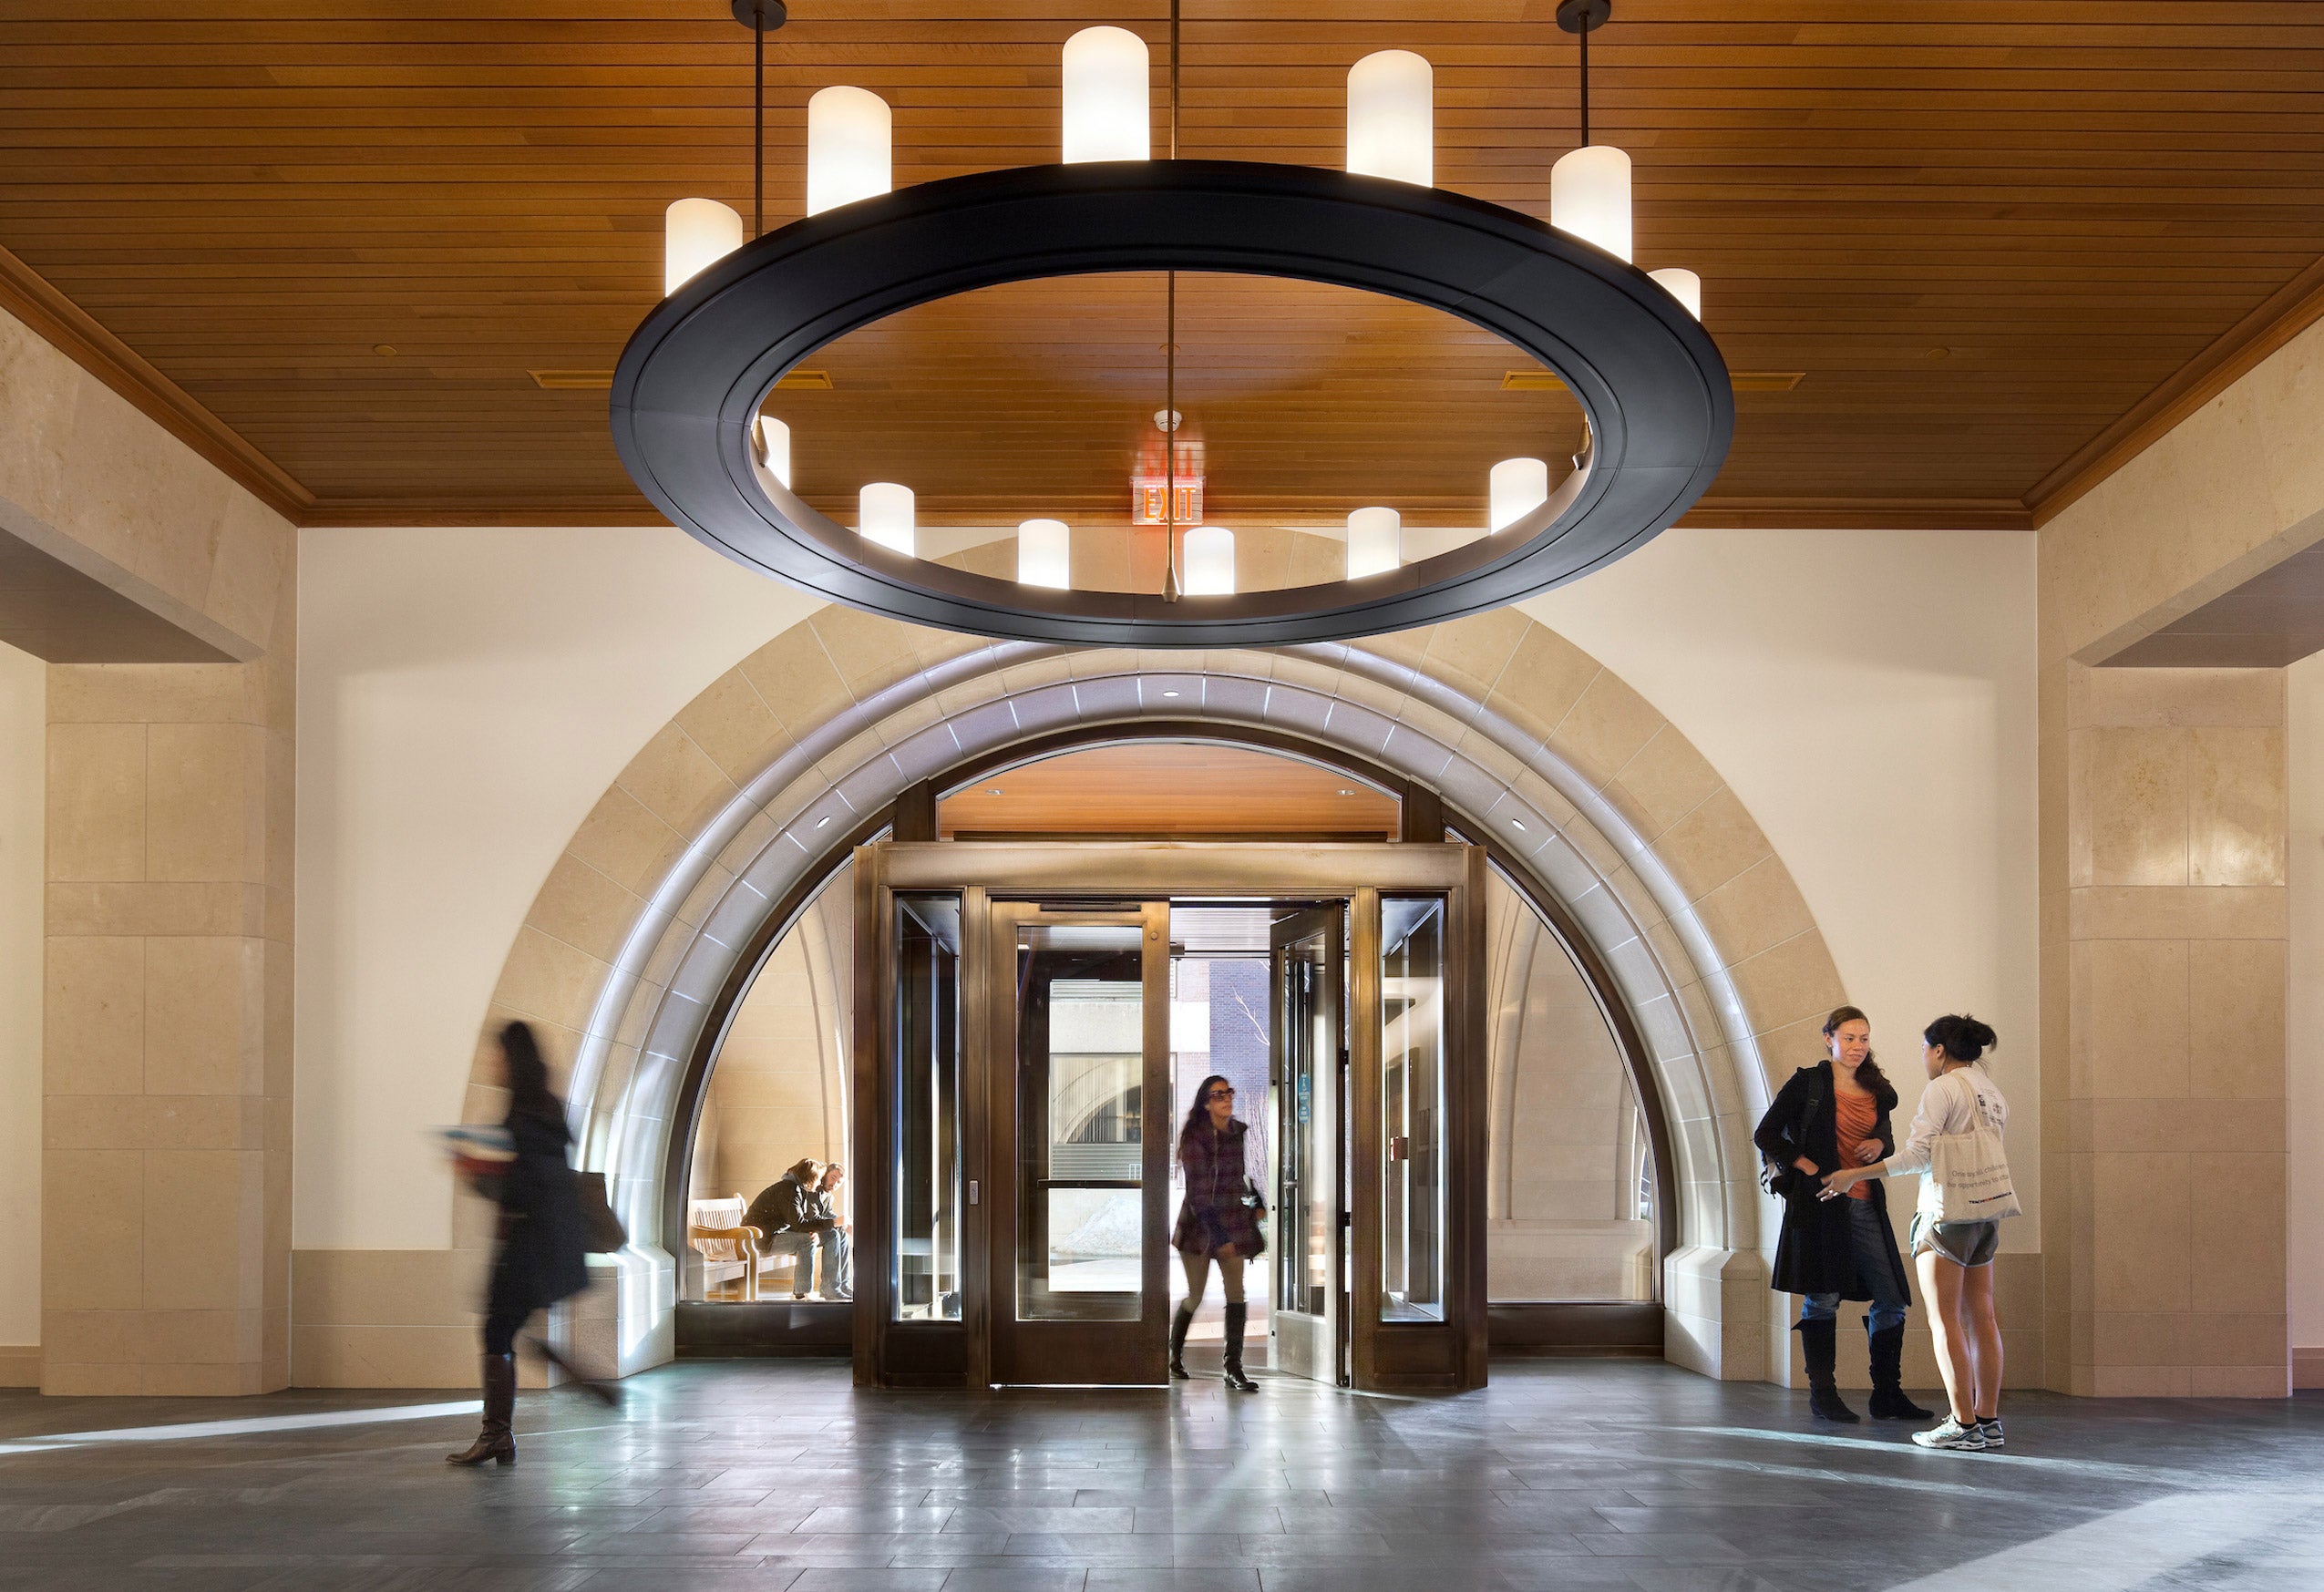 Interior shot of the entranceway to the Wasserstein building. Students entering the doorway and talking in the lobby.